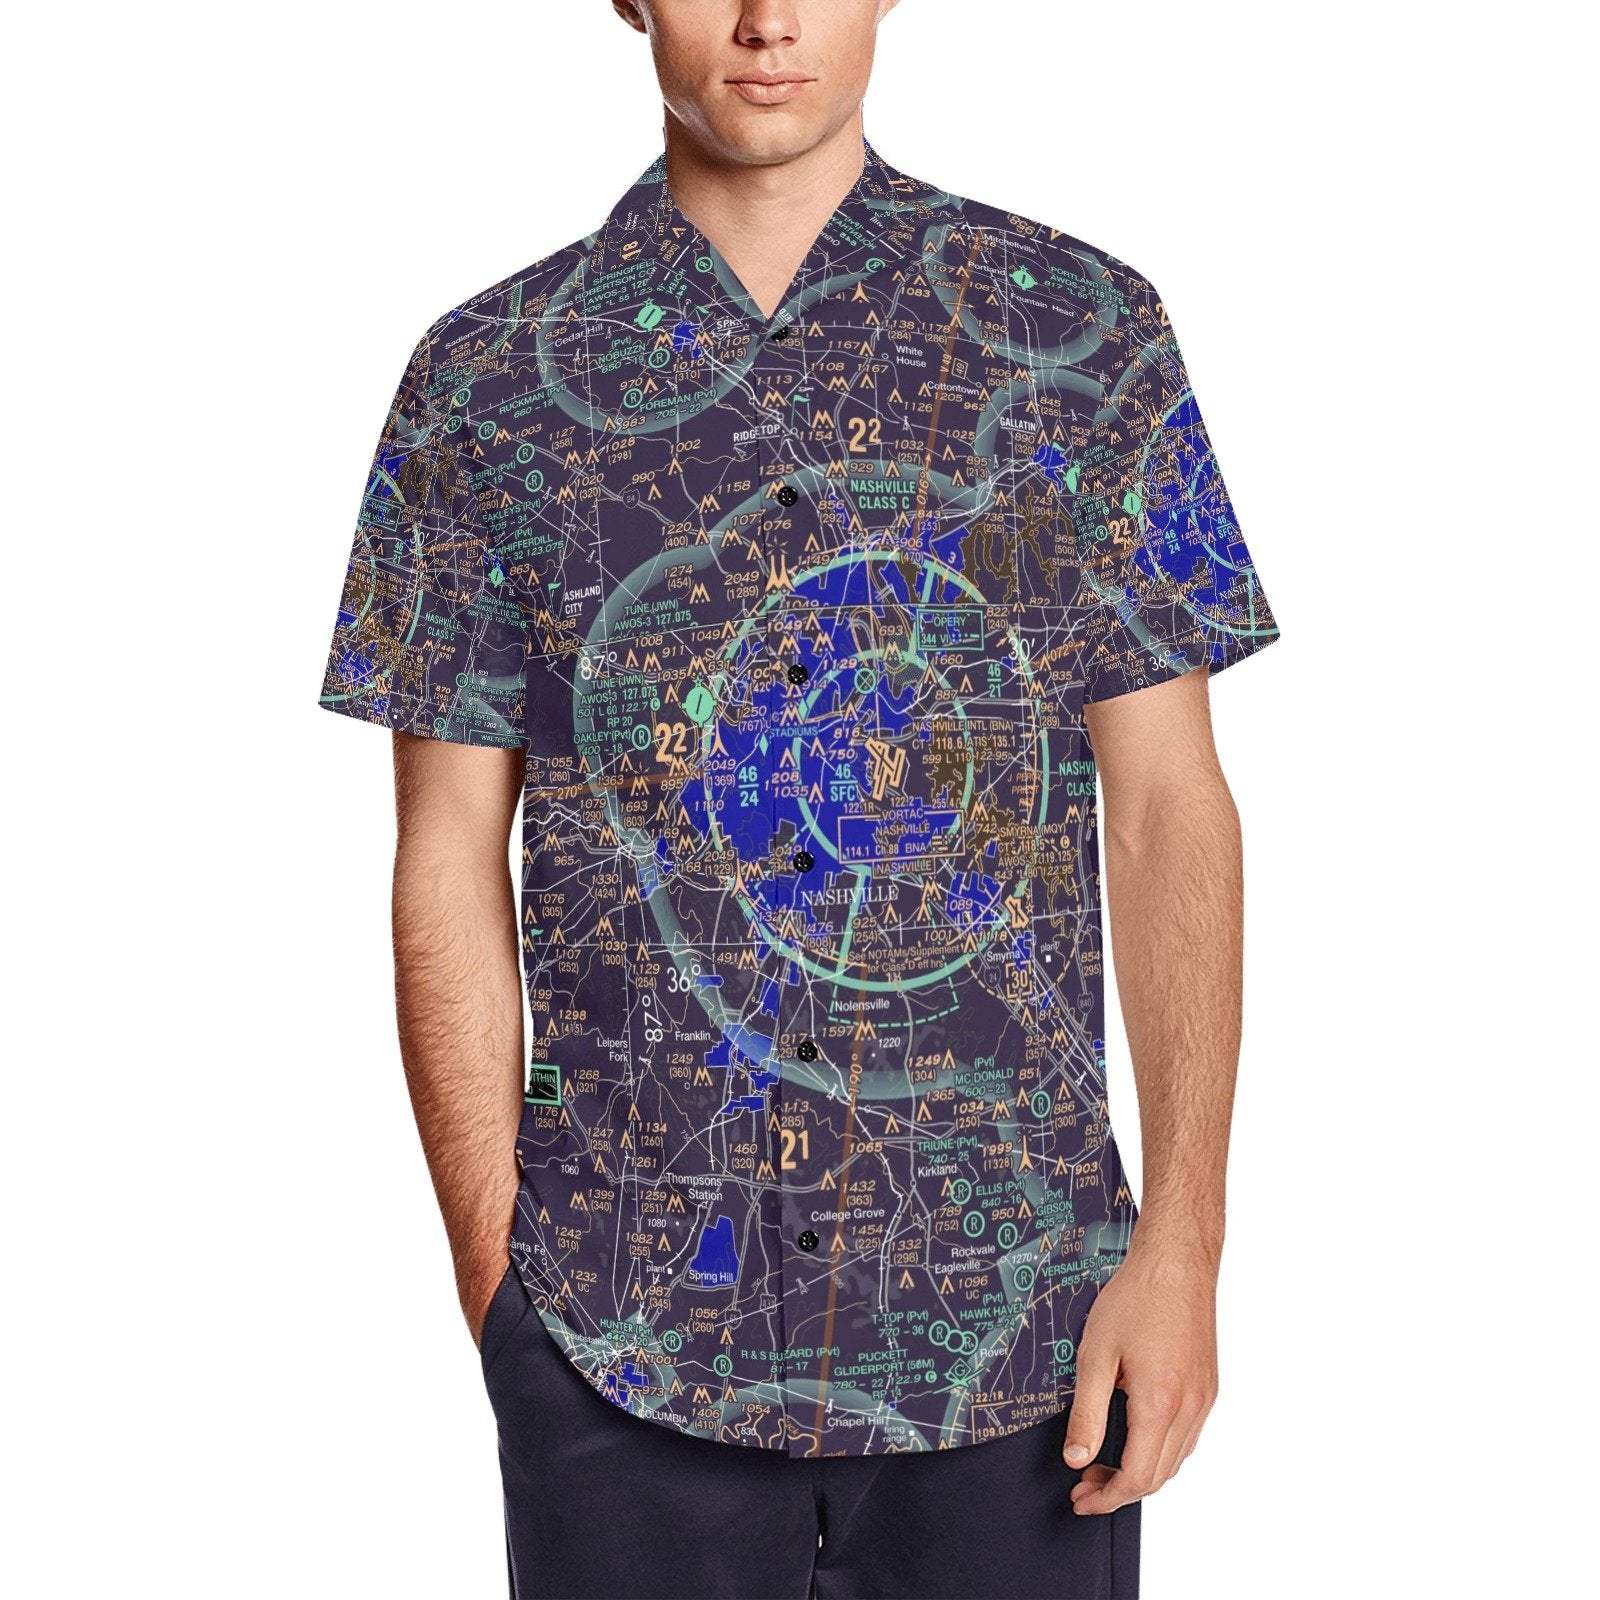 Make Your Own Men's Airspace Button Up Short Sleeve Shirt